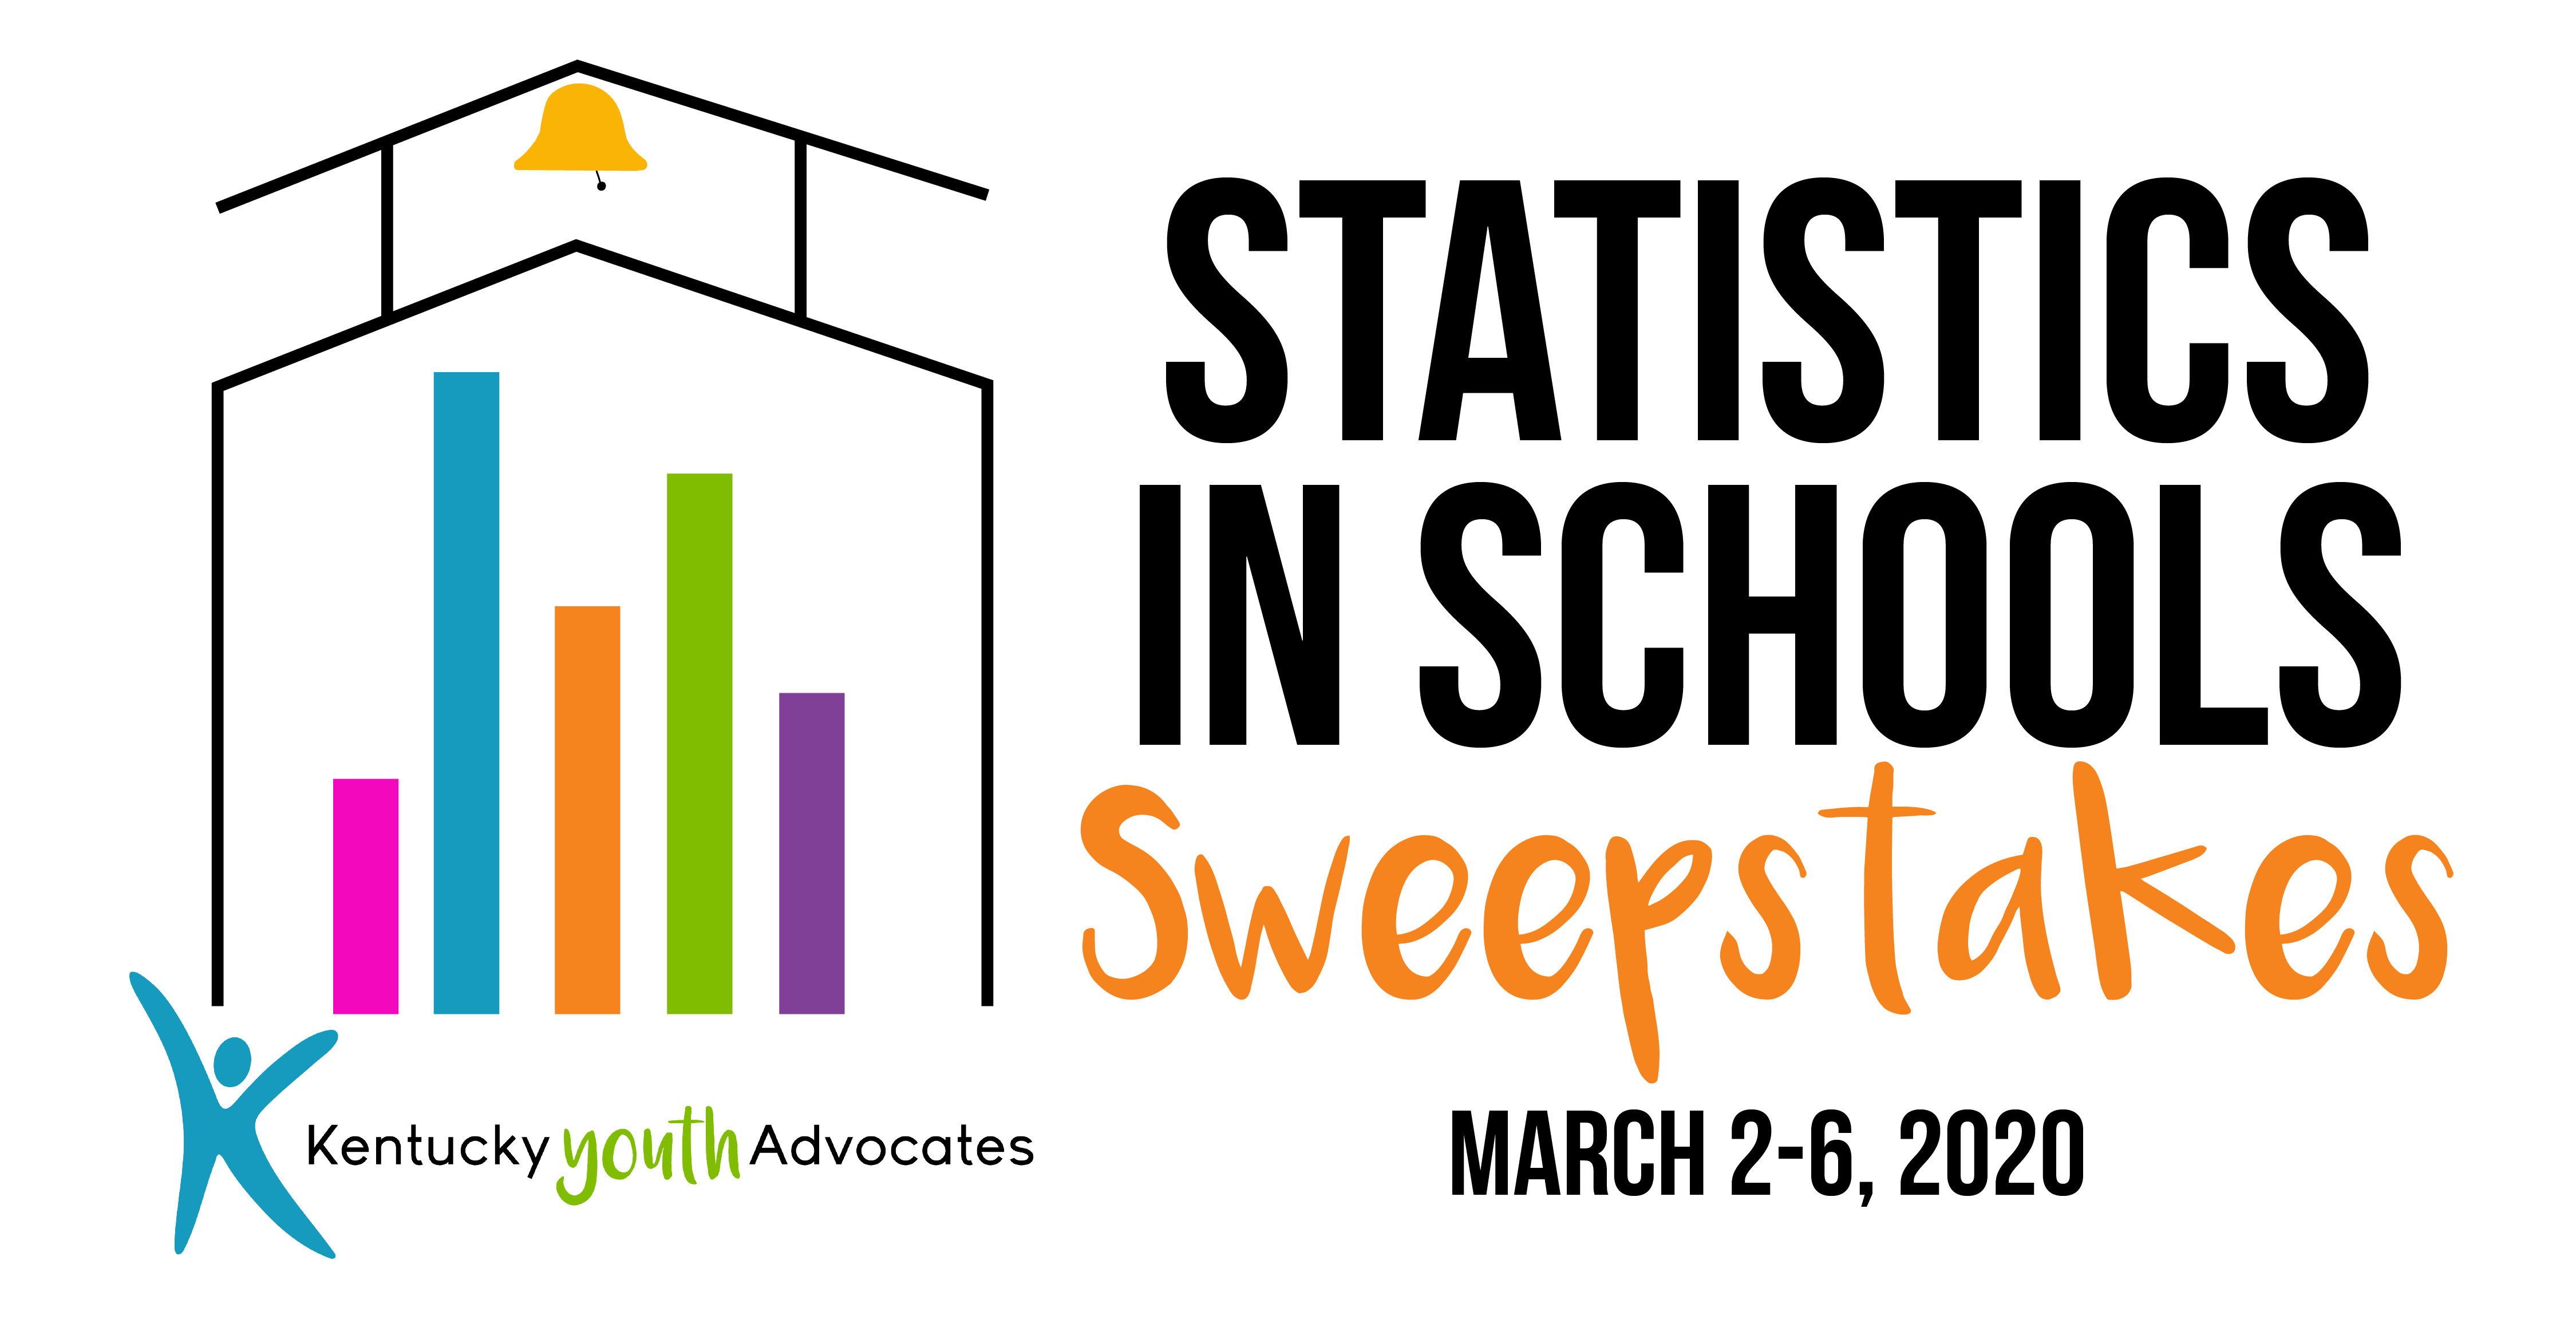 Statistics in Schools Sweepstakes March 2-6 2020